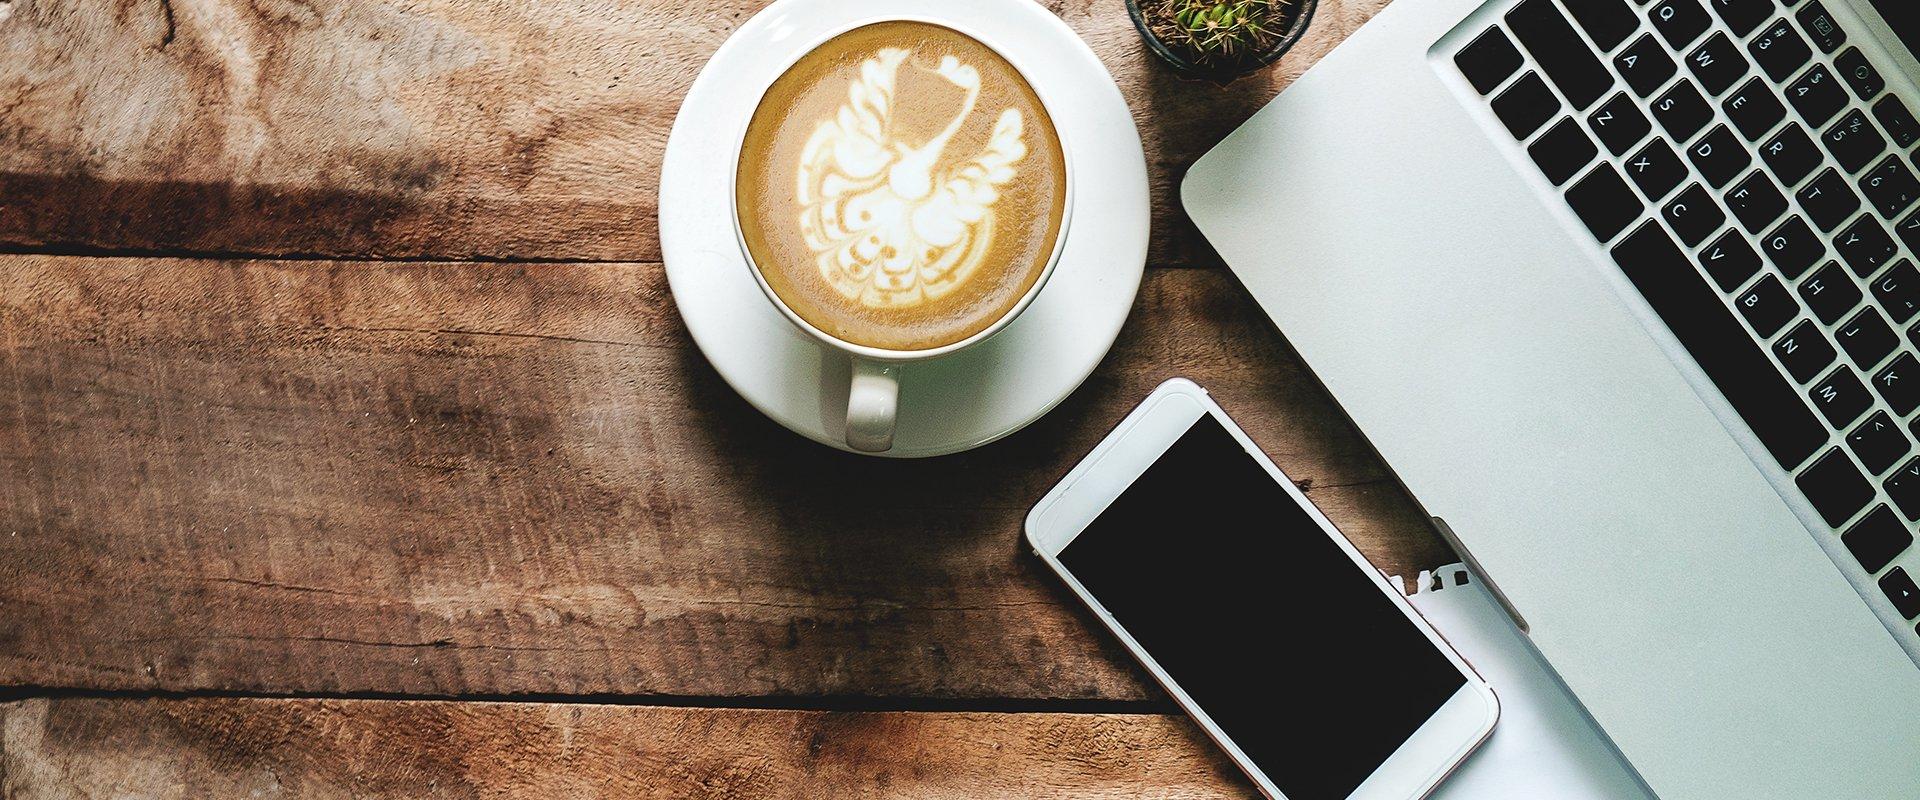 coffee, a smartphone, and a laptop on a table